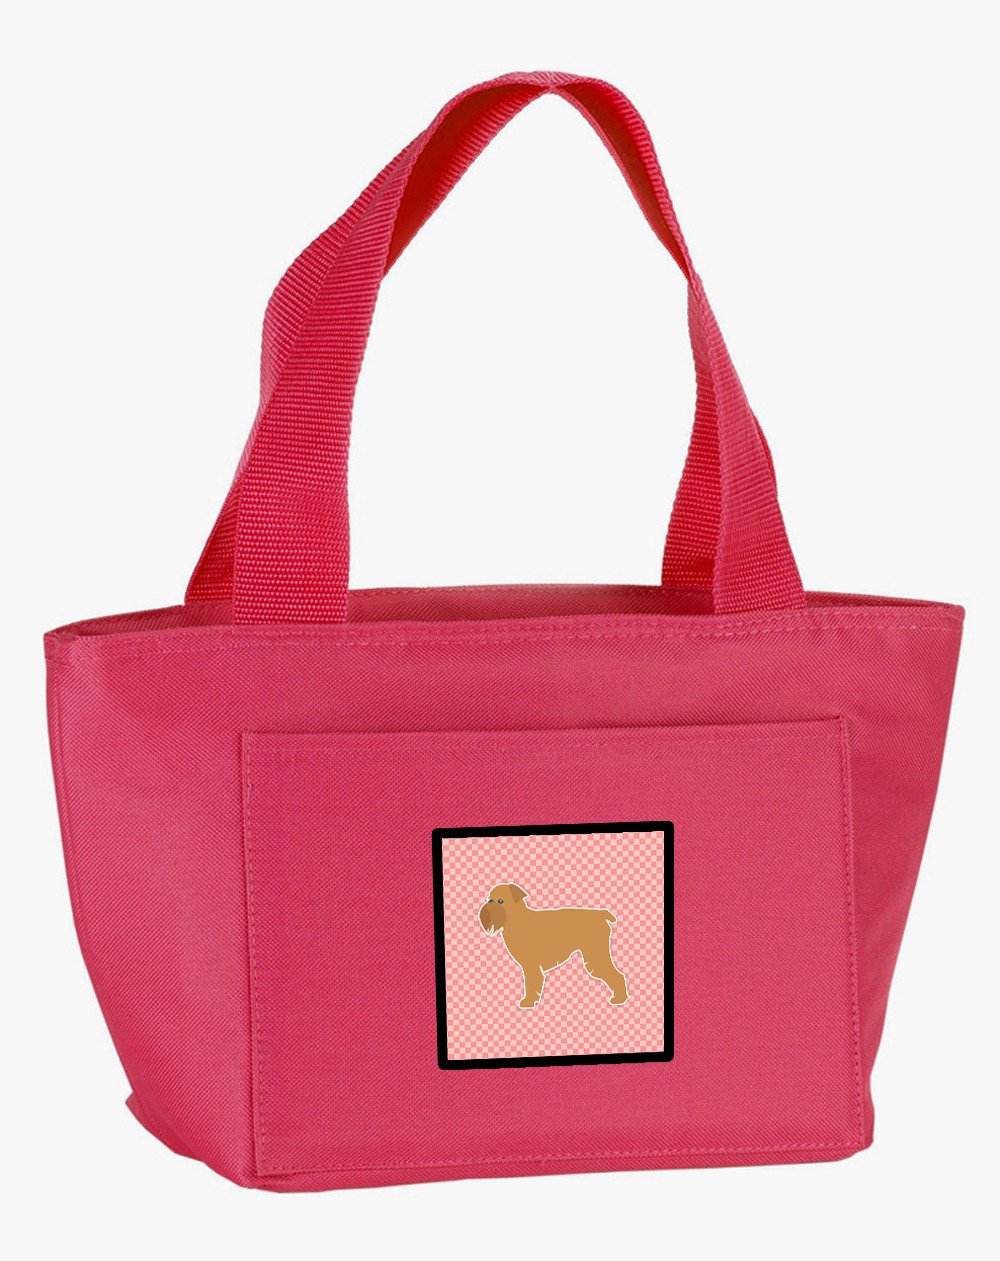 Brussels Griffon Checkerboard Pink Lunch Bag BB3640PK-8808 by Caroline's Treasures